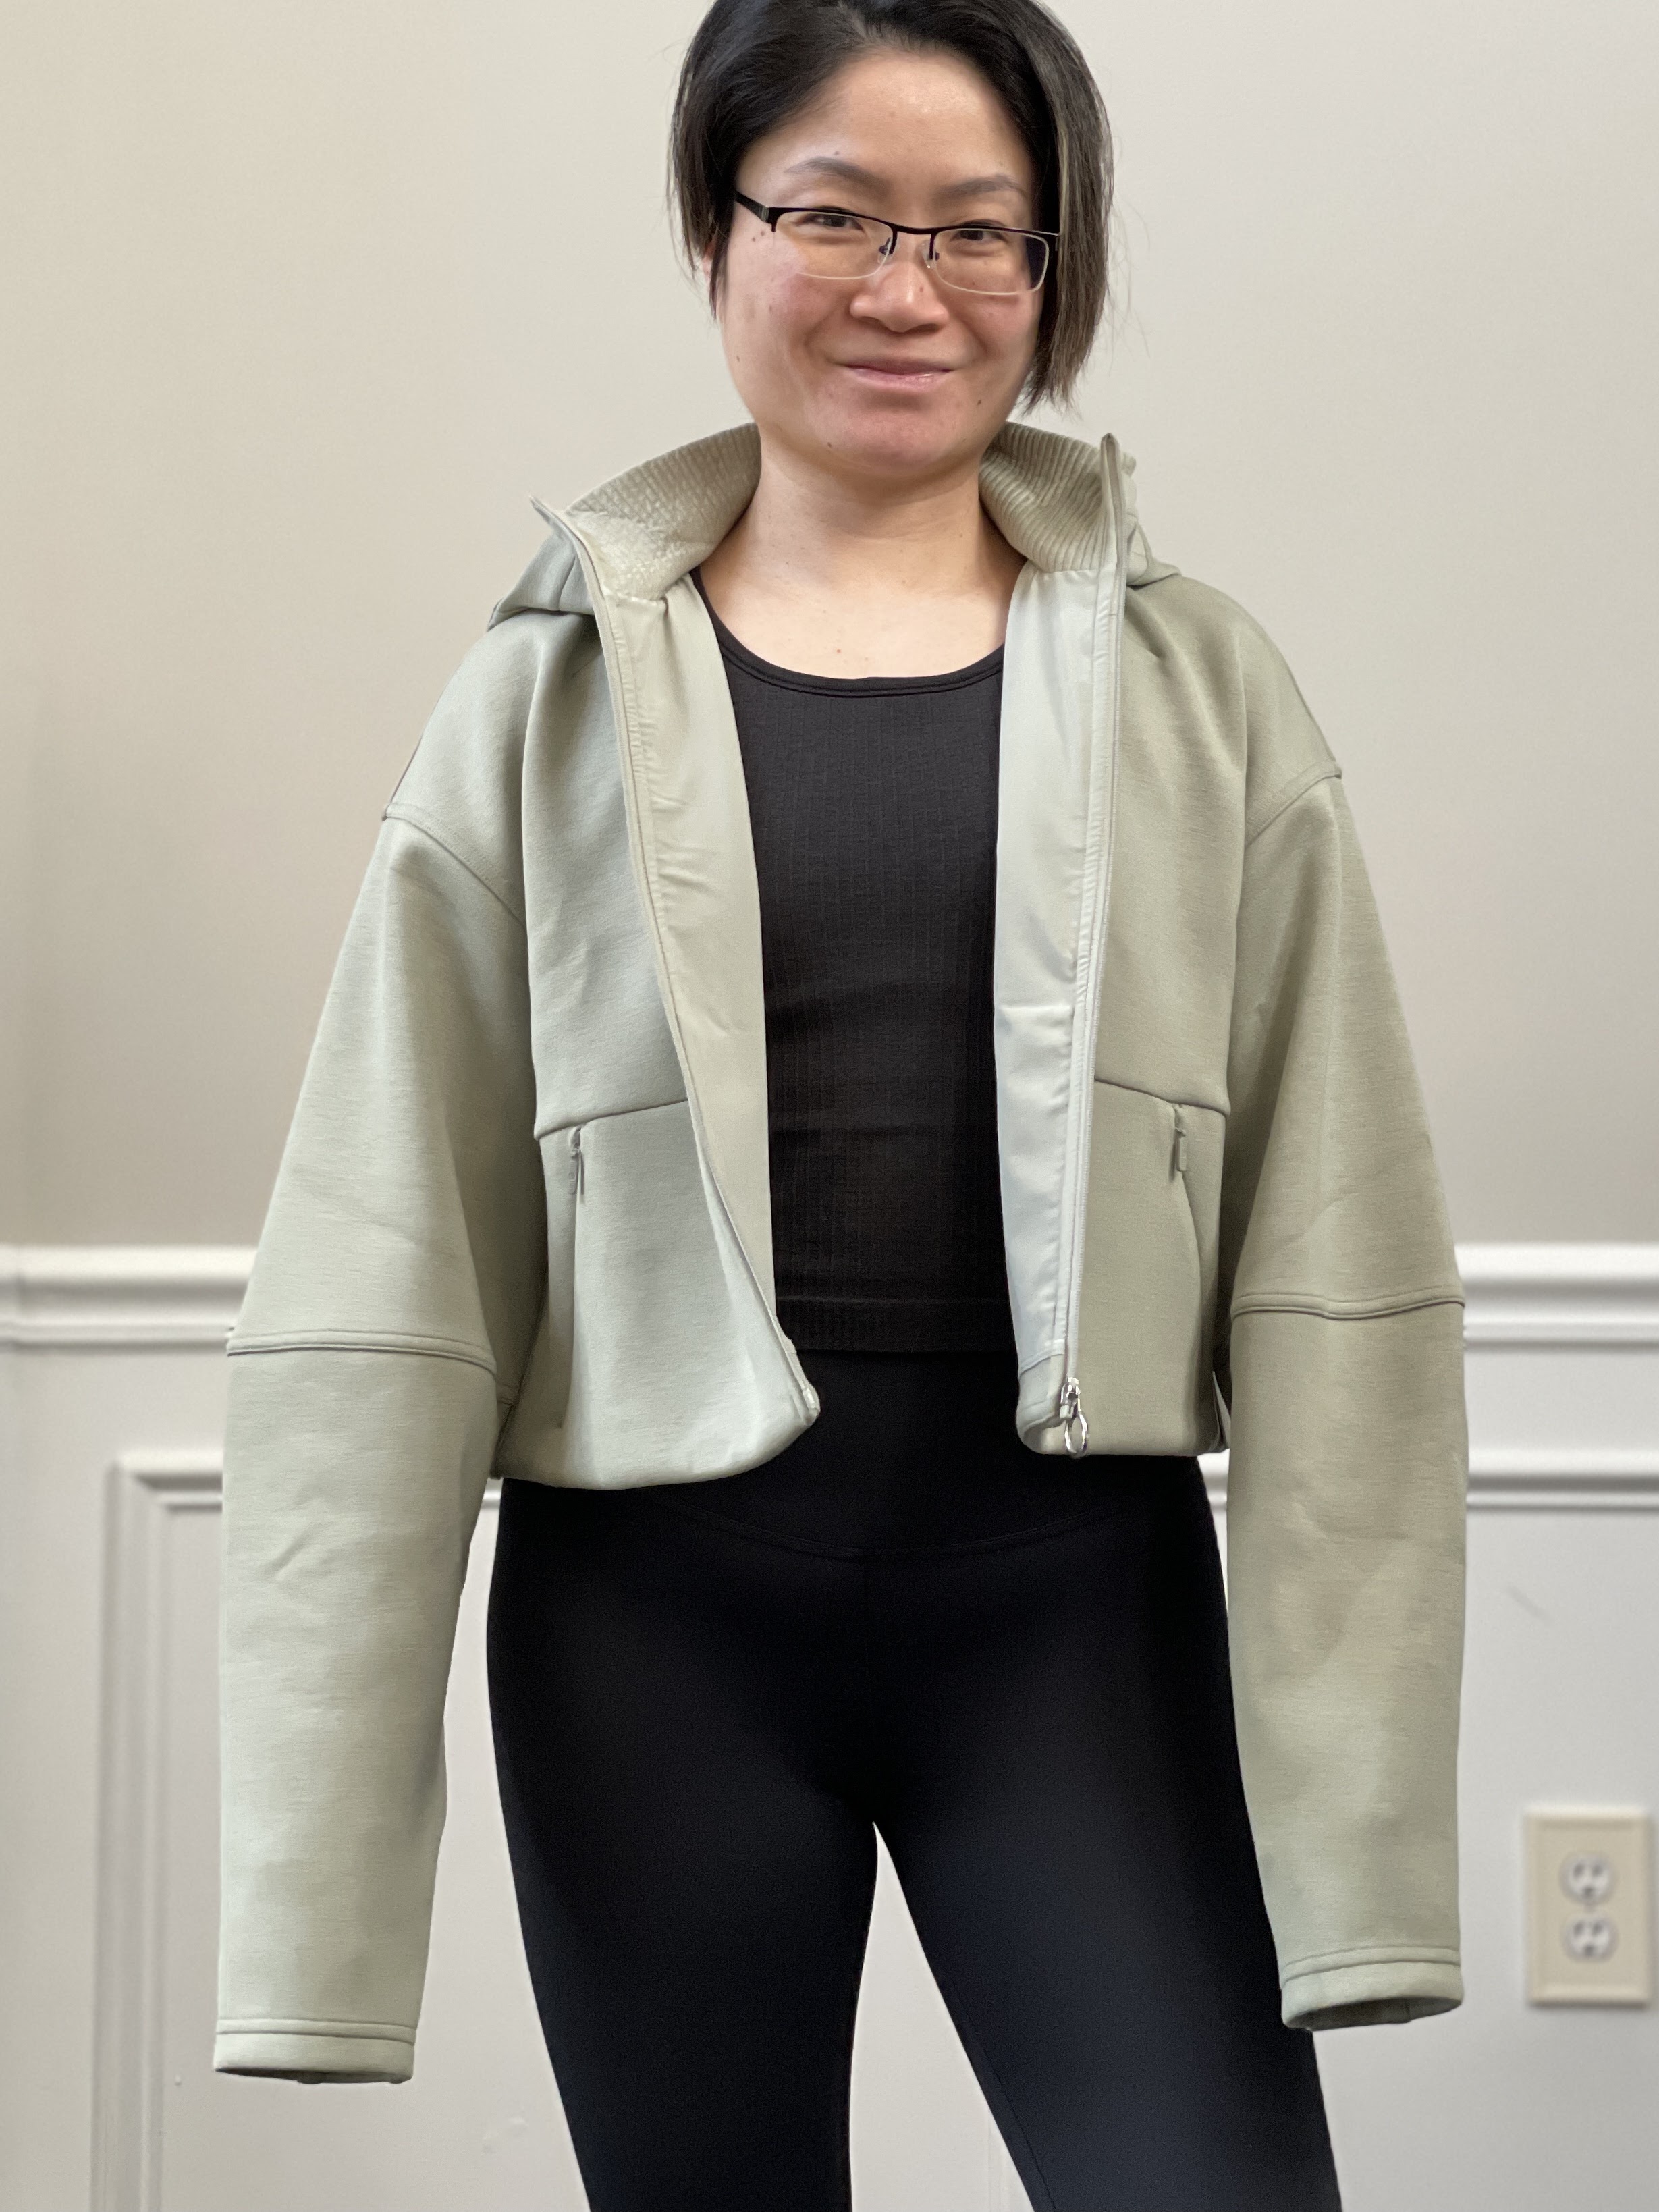 Fit Review Friday! Textured Cropped Jacket, Soft Oversized Zip